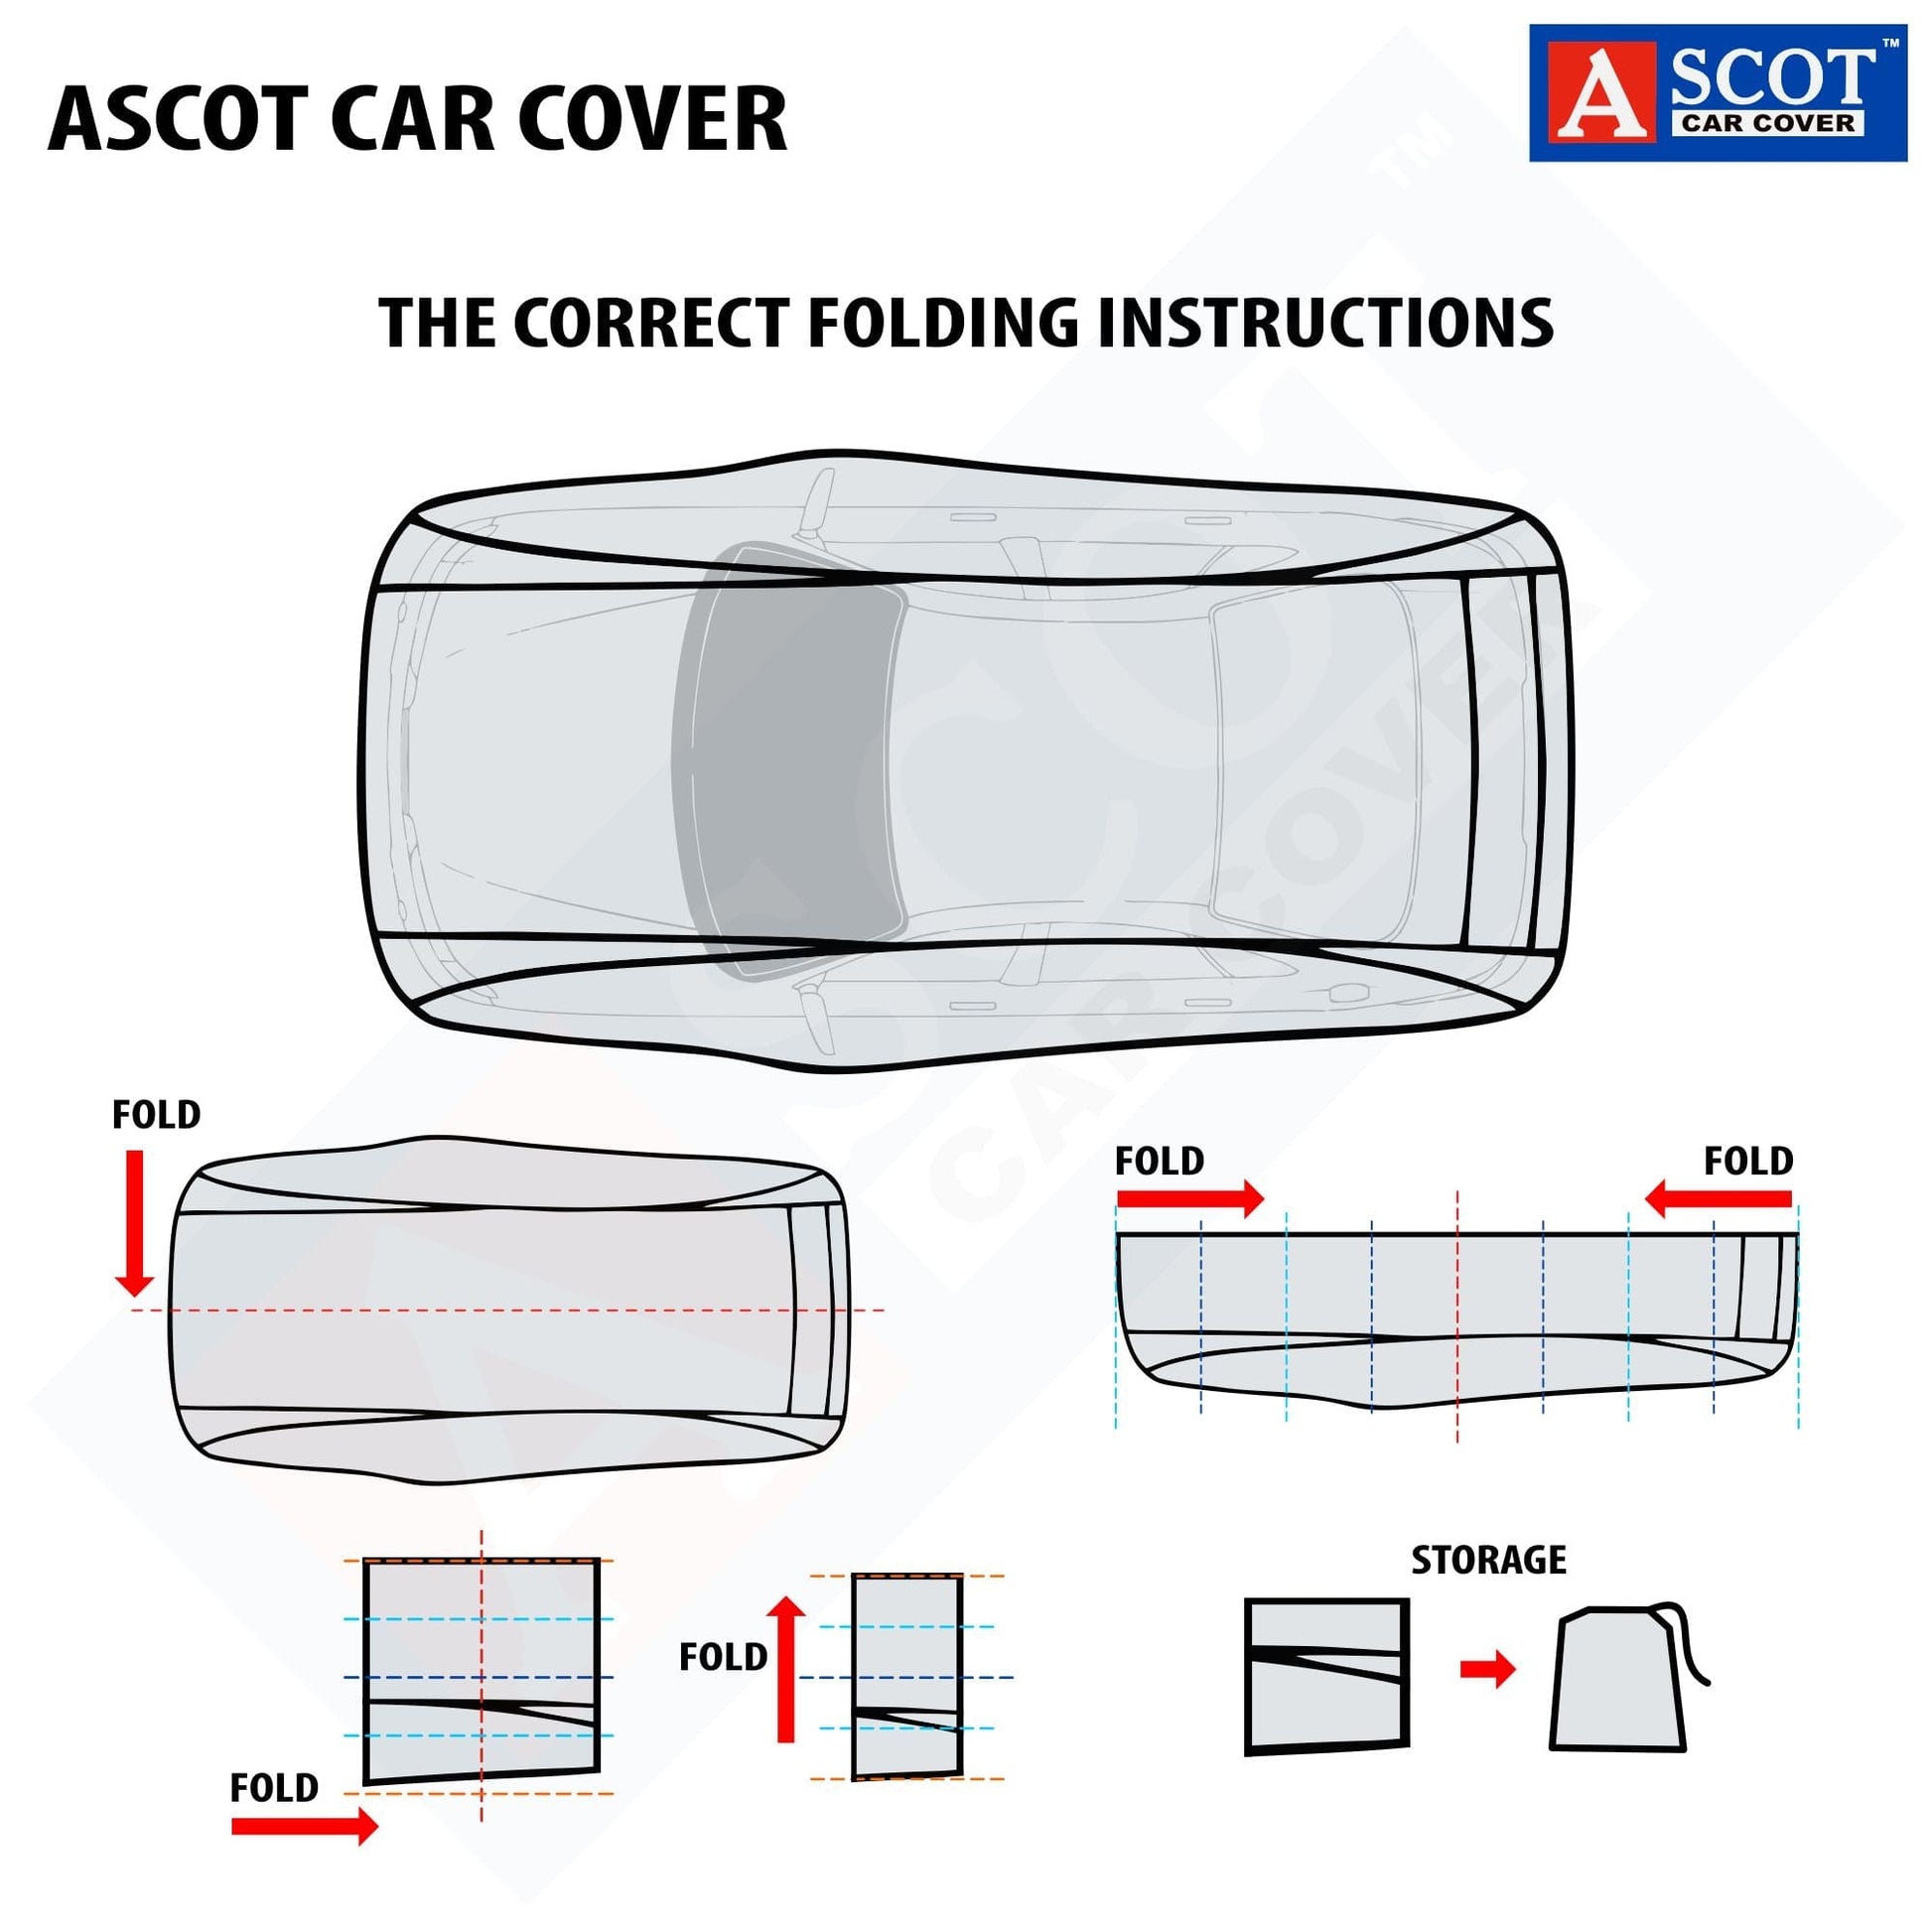 Buy MOCKHE Car Body Cover Compatible with Nissan Magnite with